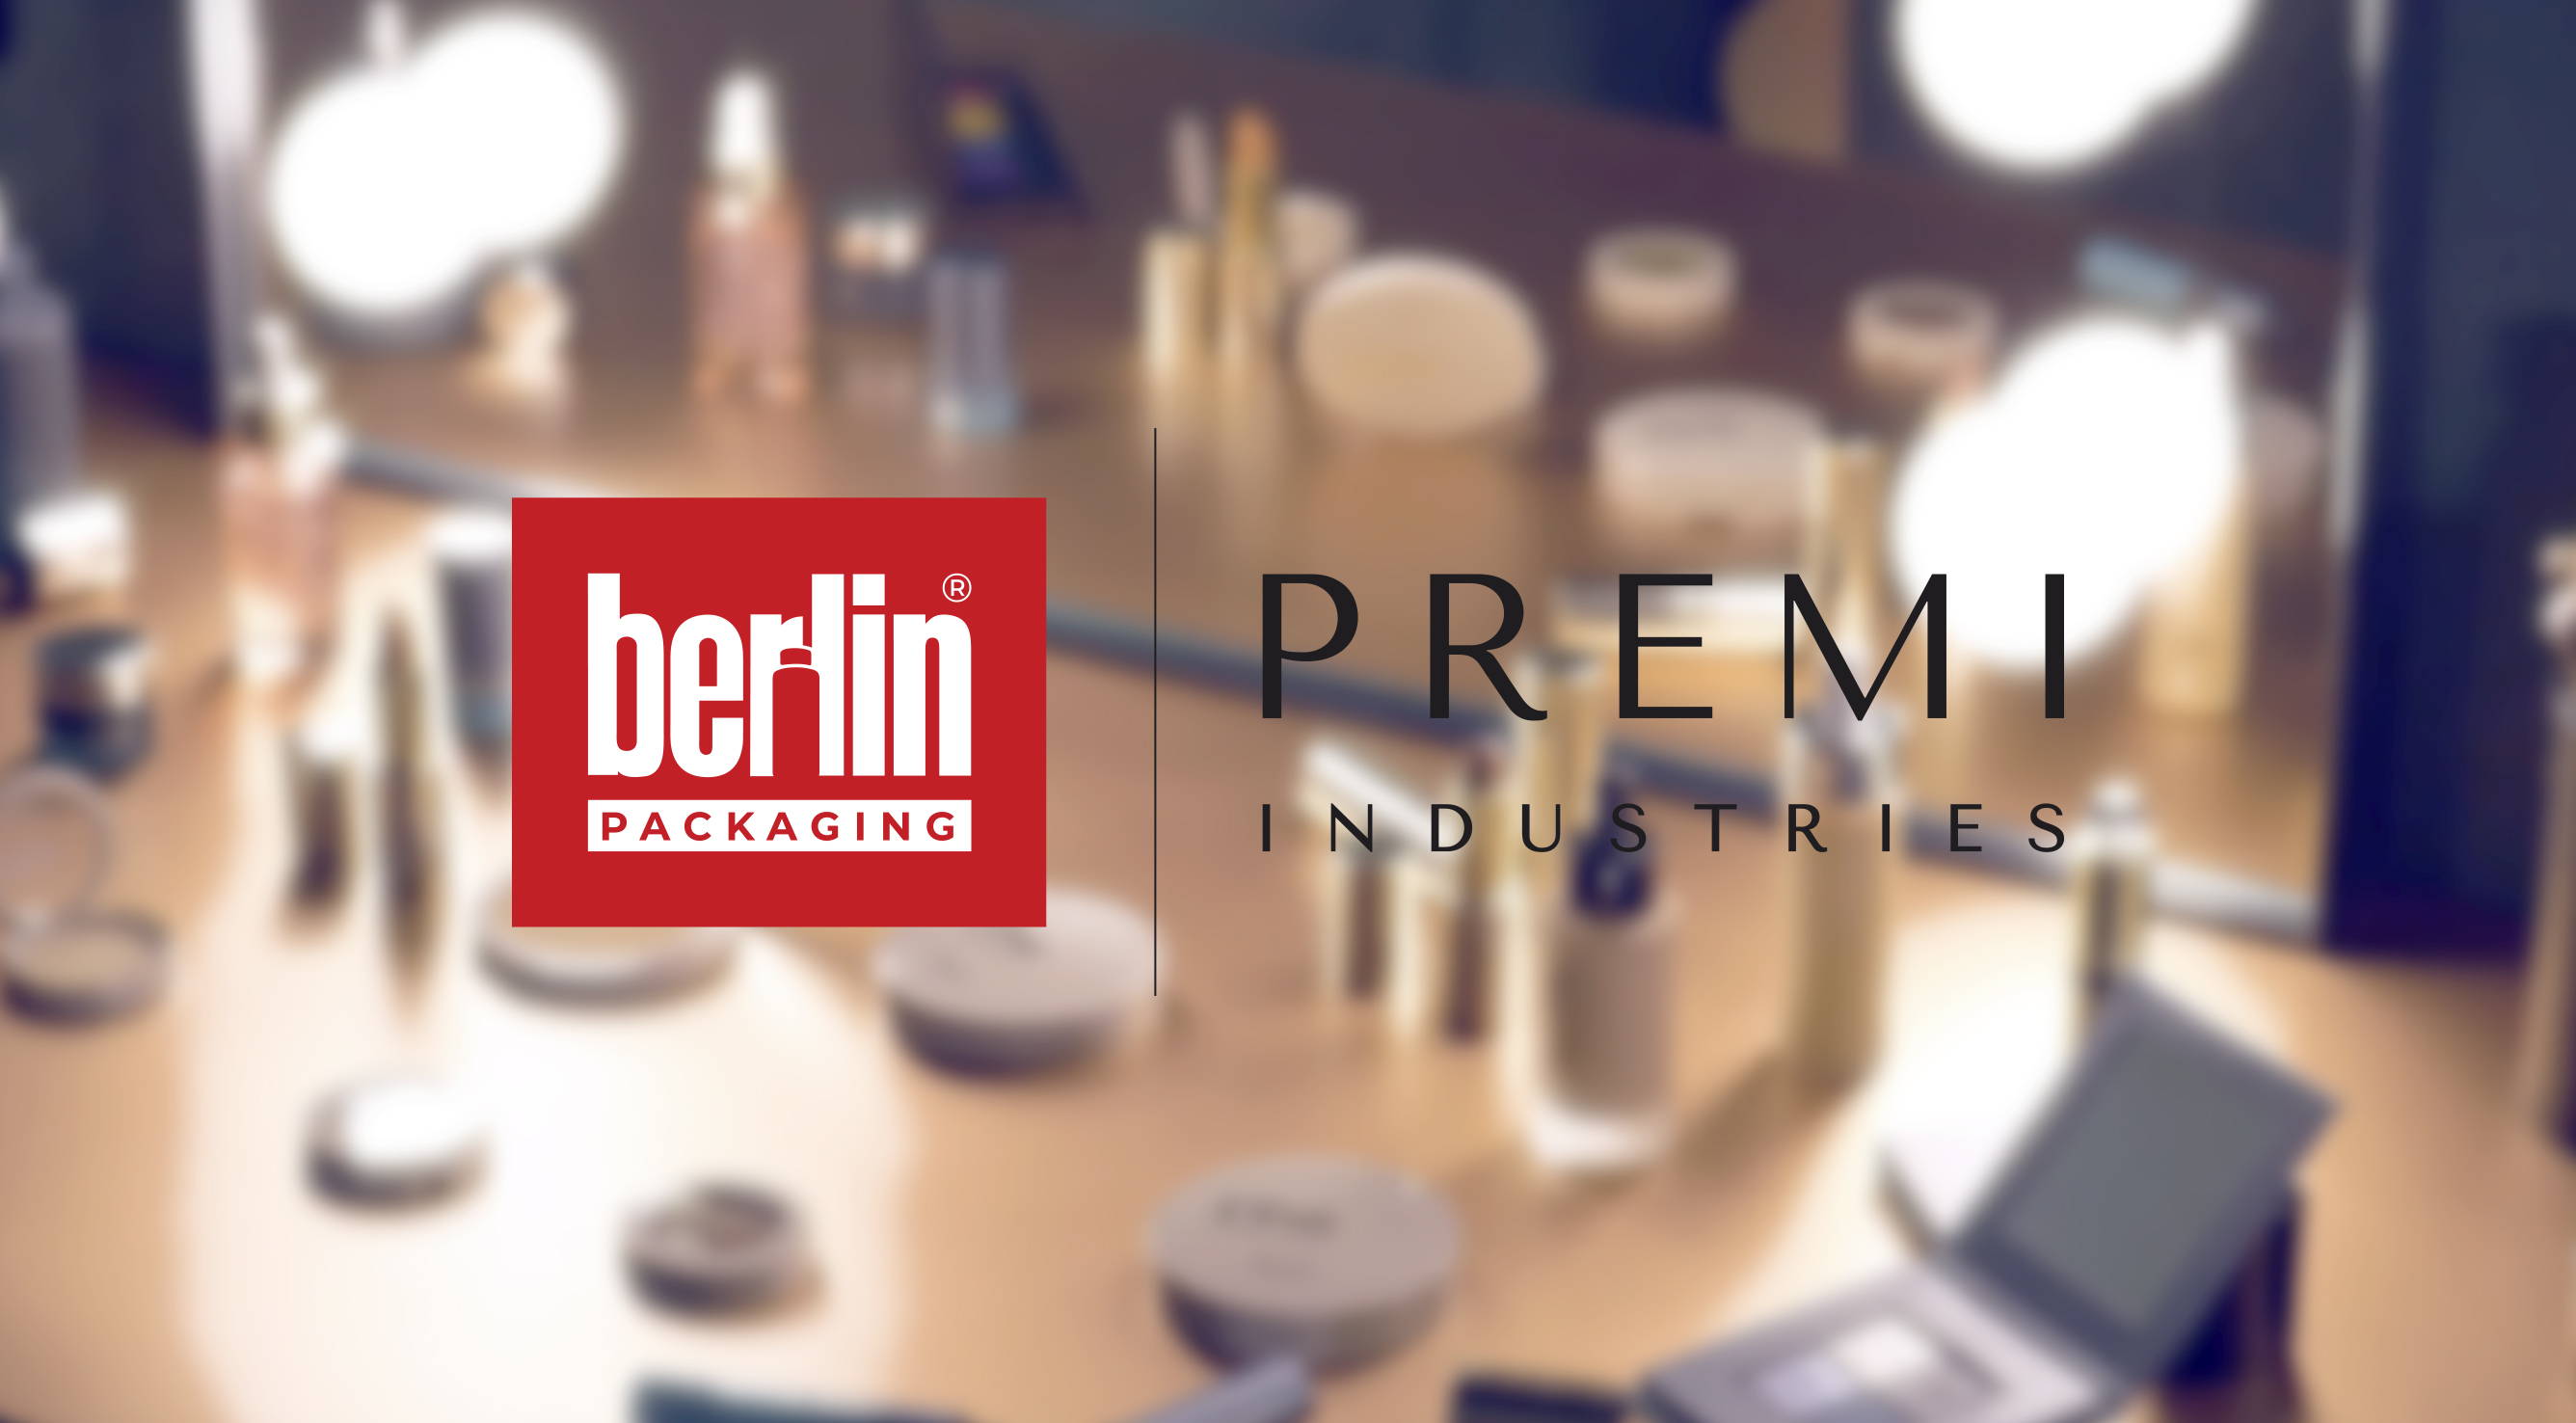 Berlin Packaging Acquires Industry Leading Premi S.p.A.